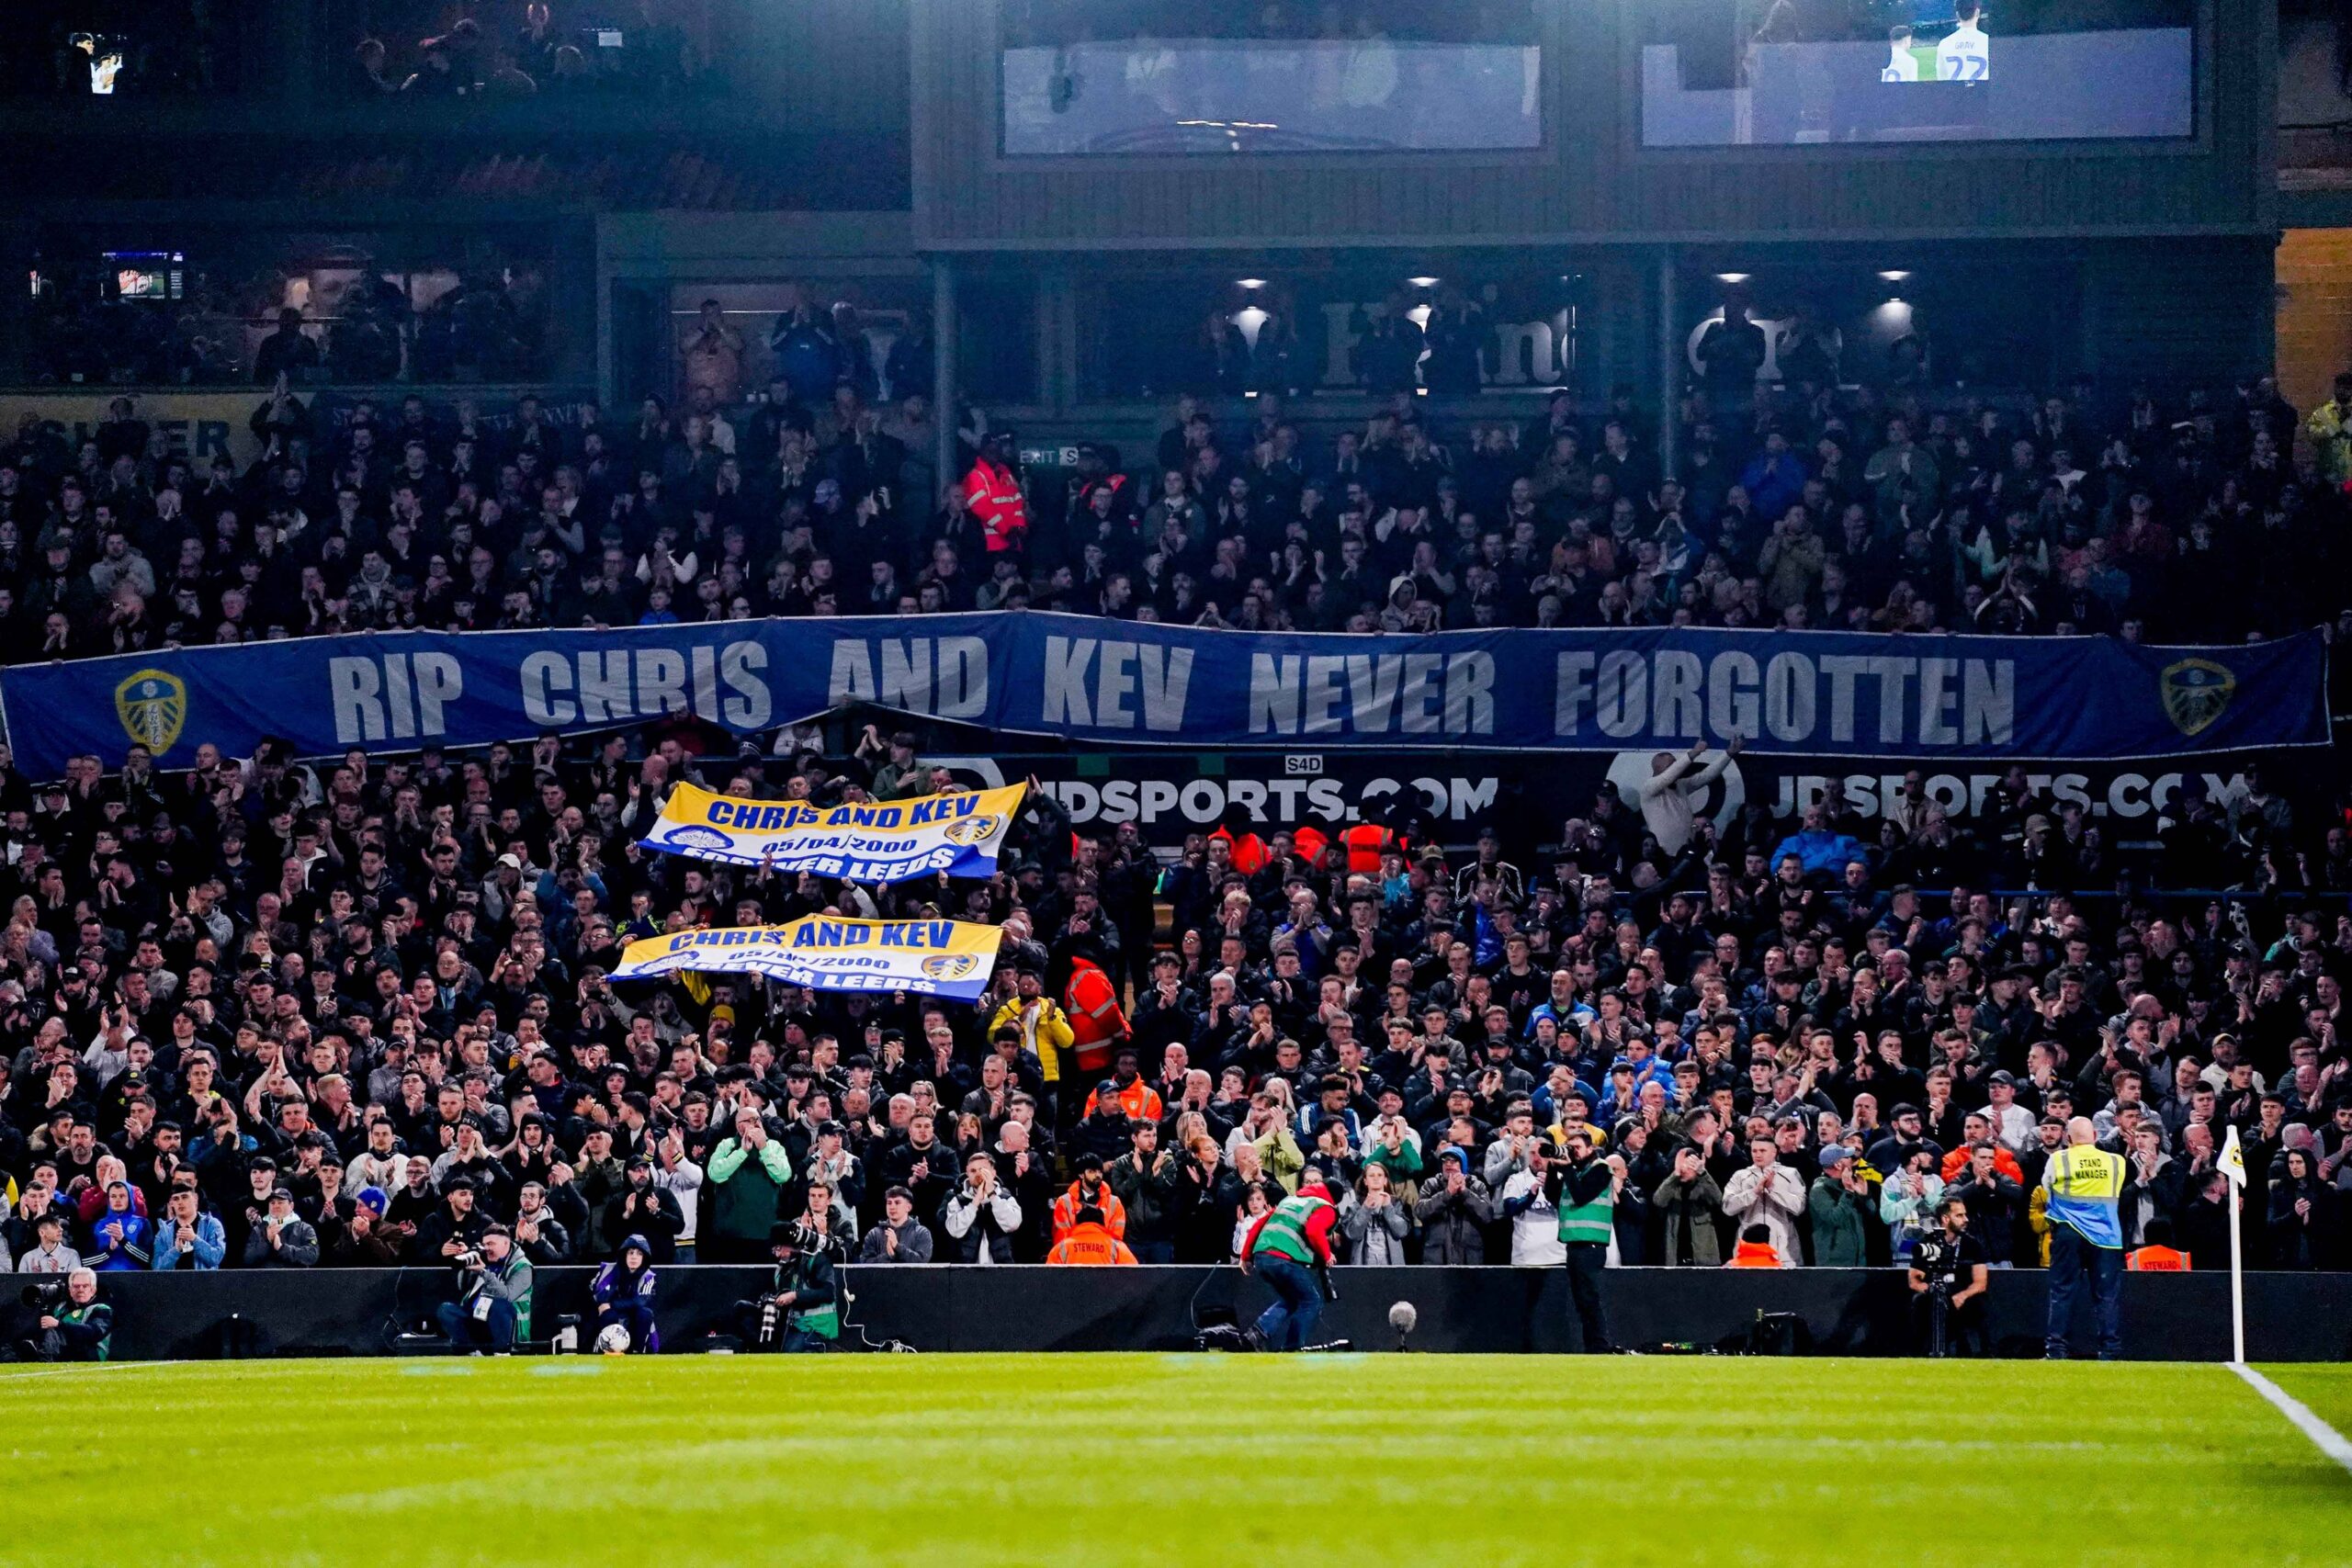 Leeds United v Hull City EFL Sky Bet Championship 01/04/2024. Leeds United fans display a banner and flags to commemorate 24 years since the passing of Leeds United fans Kevin Speight and Christopher Loftus during the EFL Sky Bet Championship match between Leeds United and Hull City at Elland Road, Leeds, England on 1 April 2024. Leeds Elland Road West Yorkshire England Editorial use only DataCo restrictions apply See www.football-dataco.com , Copyright: xMalcolmxBrycex PSI-19354-0037